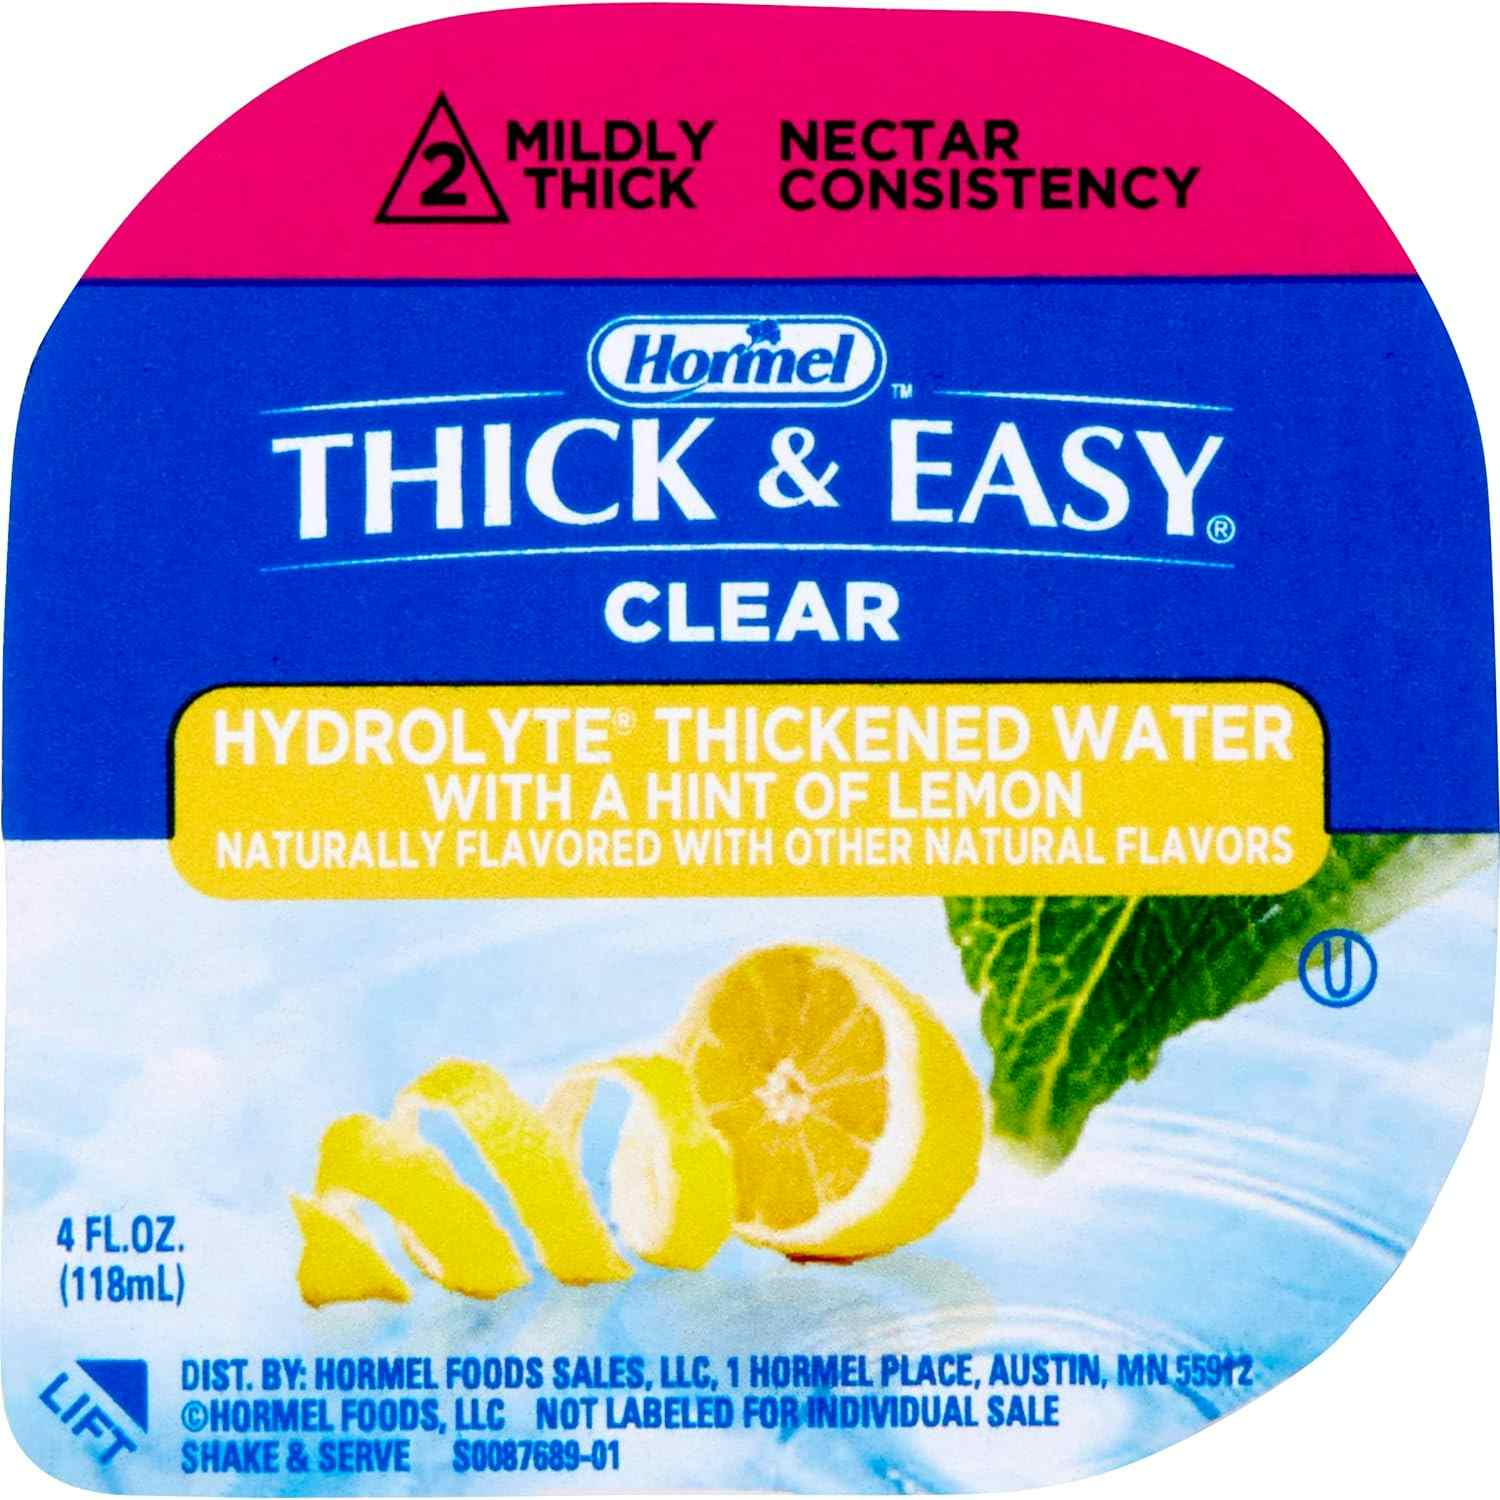 Thick & Easy Hydrolyte Thickened Water, Nectar Consistency